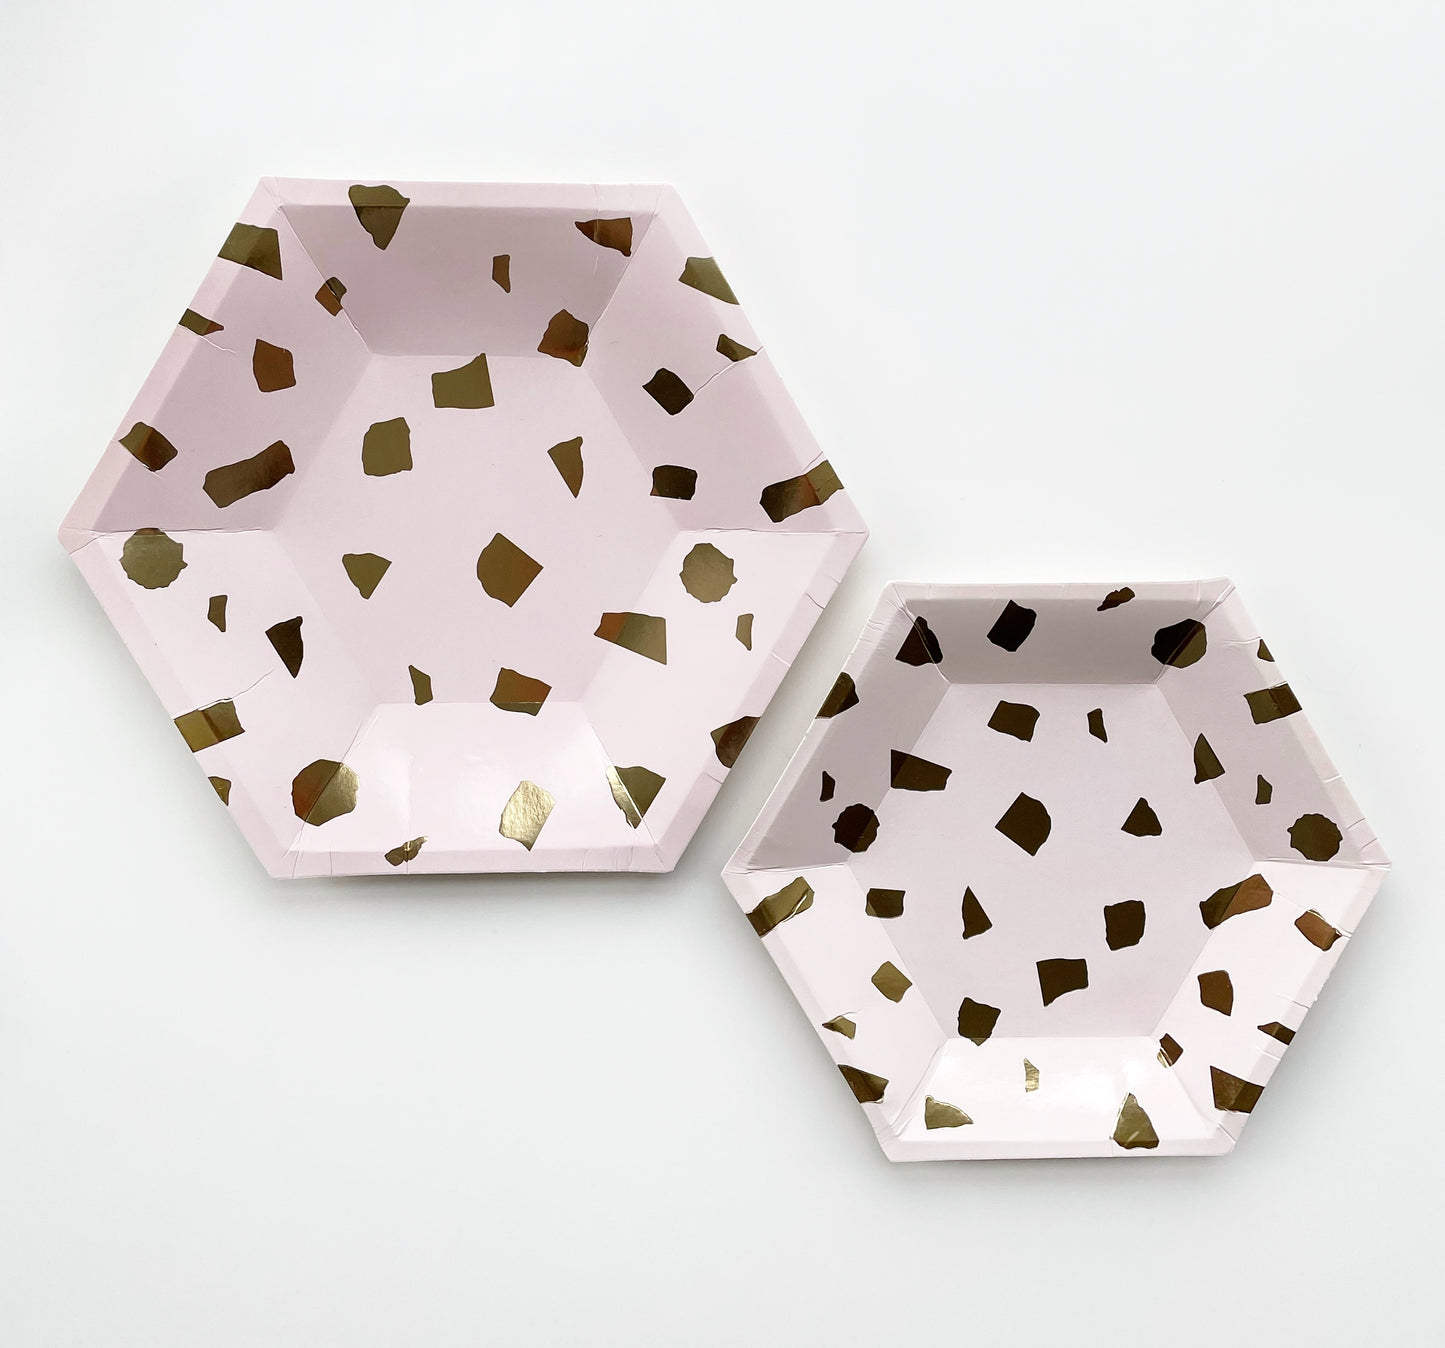 The large and small paper party plates are in the shape of a hexagon. The plates are a pale blush pink colour with gold foil detail.